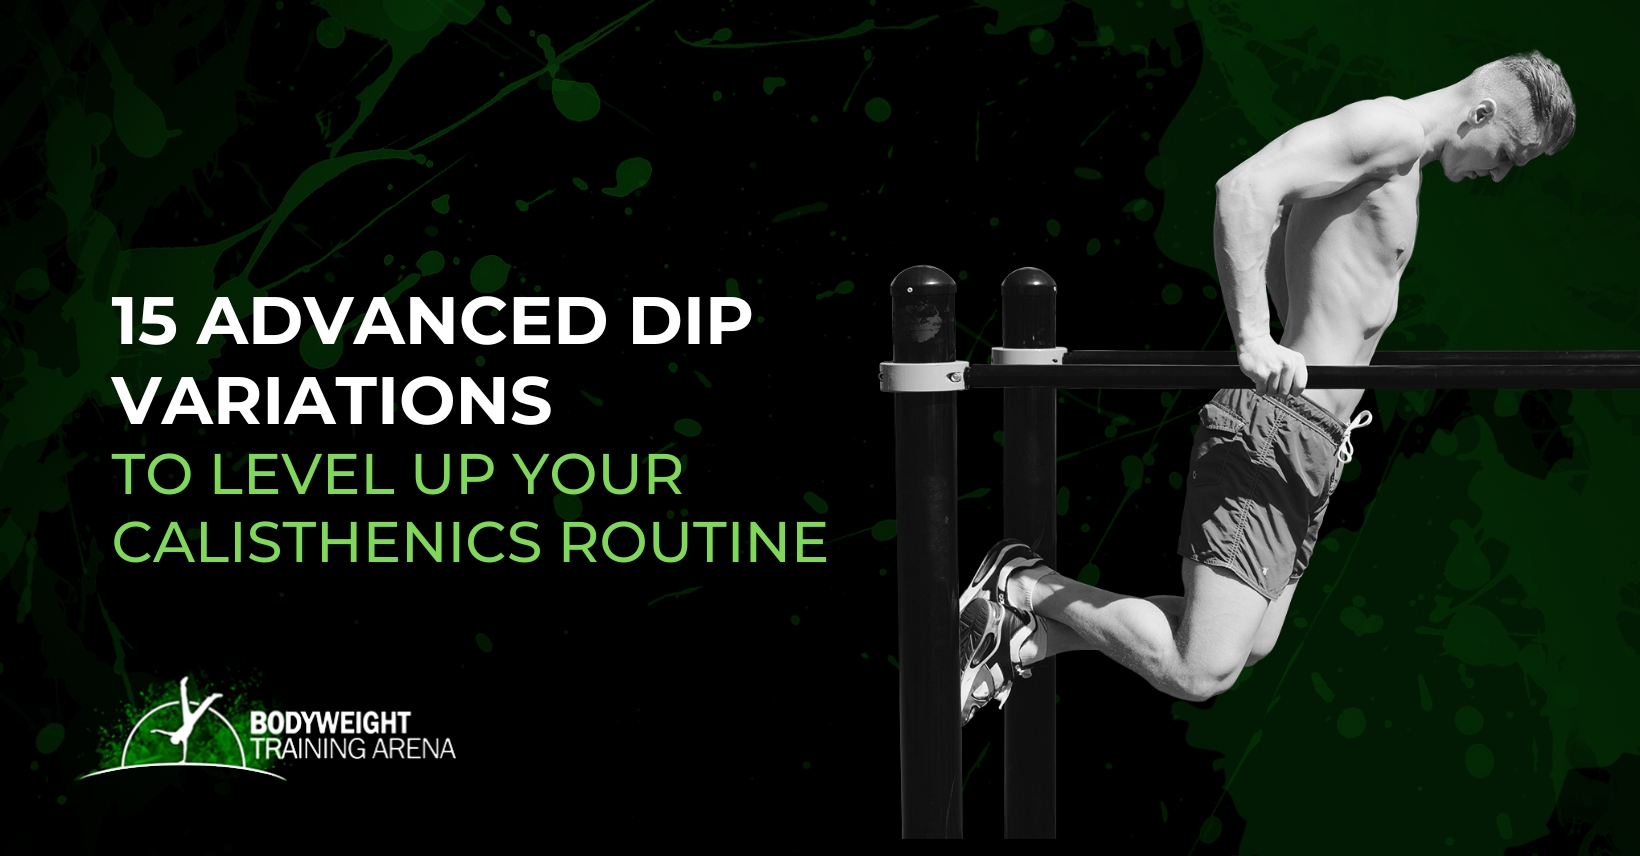 15 Advanced Dip Variations to Level Up Your Calisthenics Routine